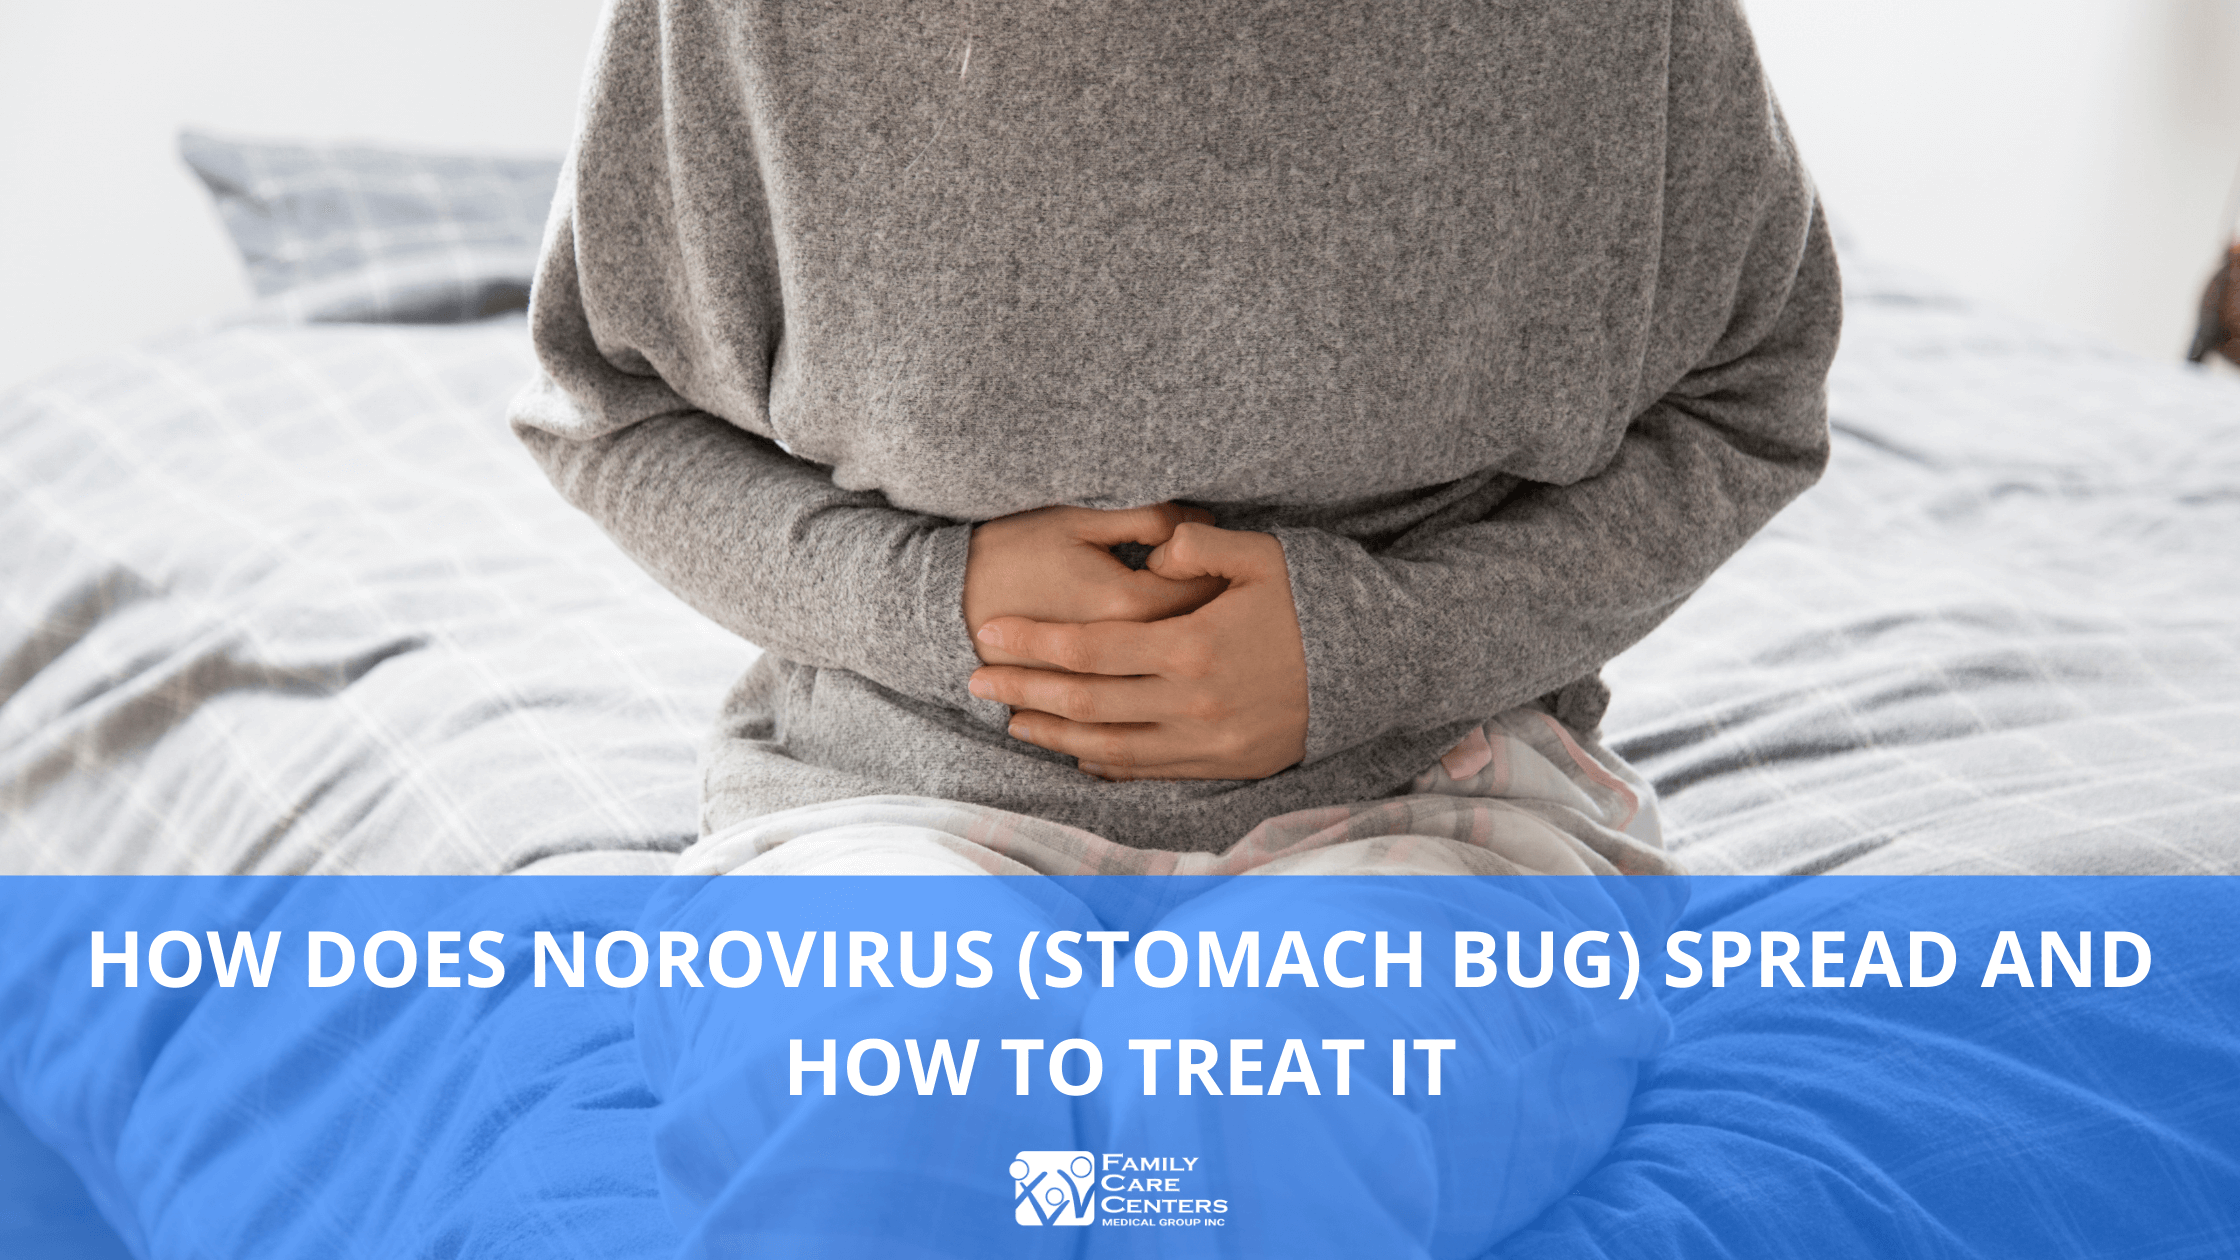 How Does Norovirus (Stomach Bug) Spread and How to Treat It